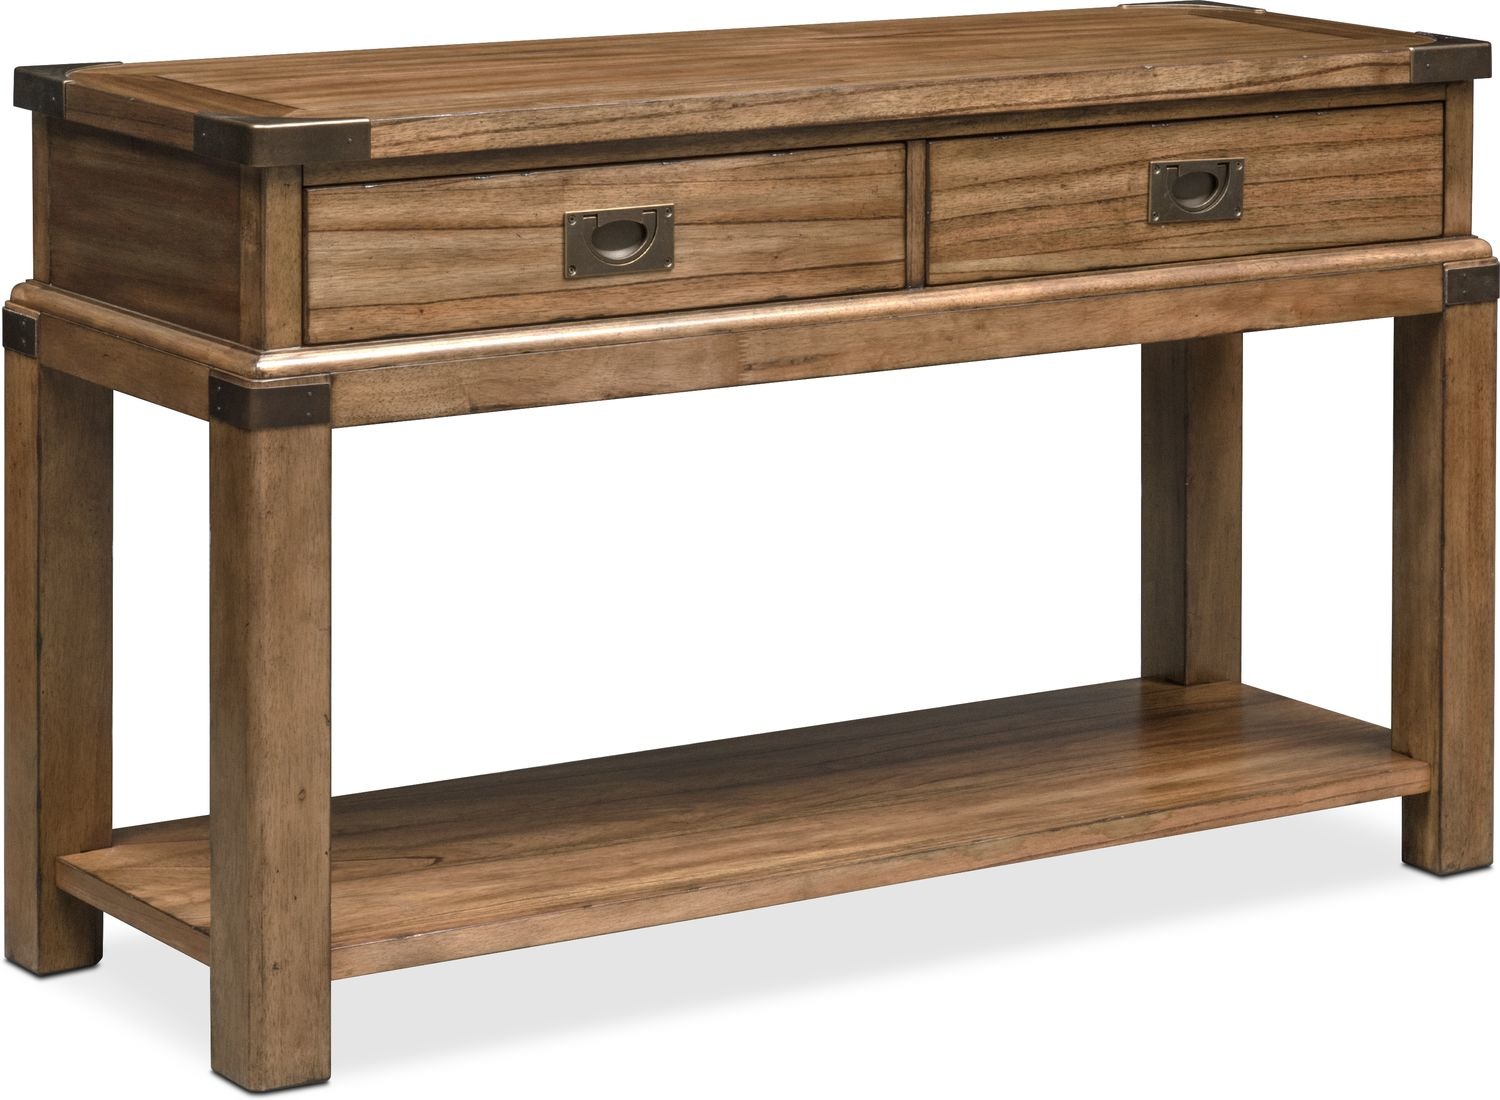 explorer sofa table chestnut value city furniture and mattresses accent occasional keter beer cooler dining room cupboard pottery barn wood desk ethan allen windsor chairs